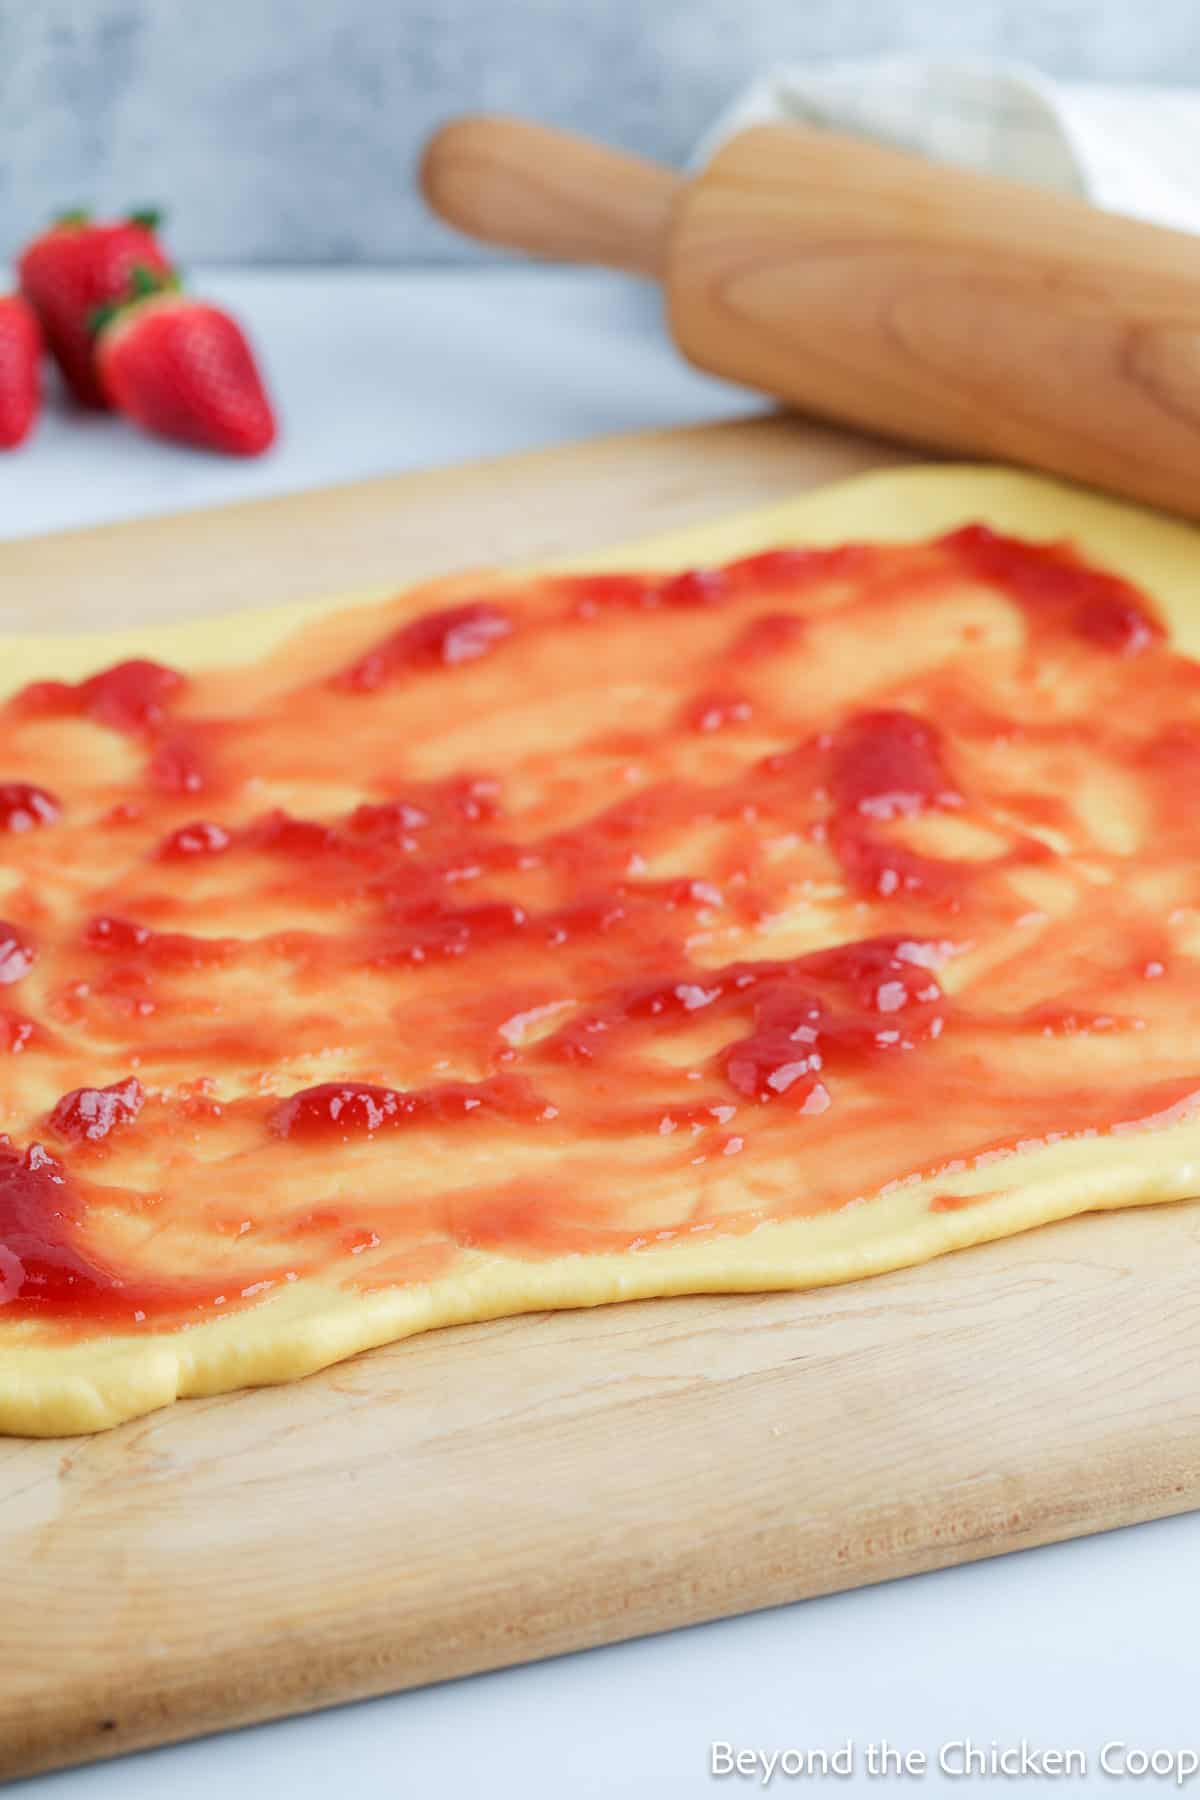 Strawberry jam spread on top of rolled dough.